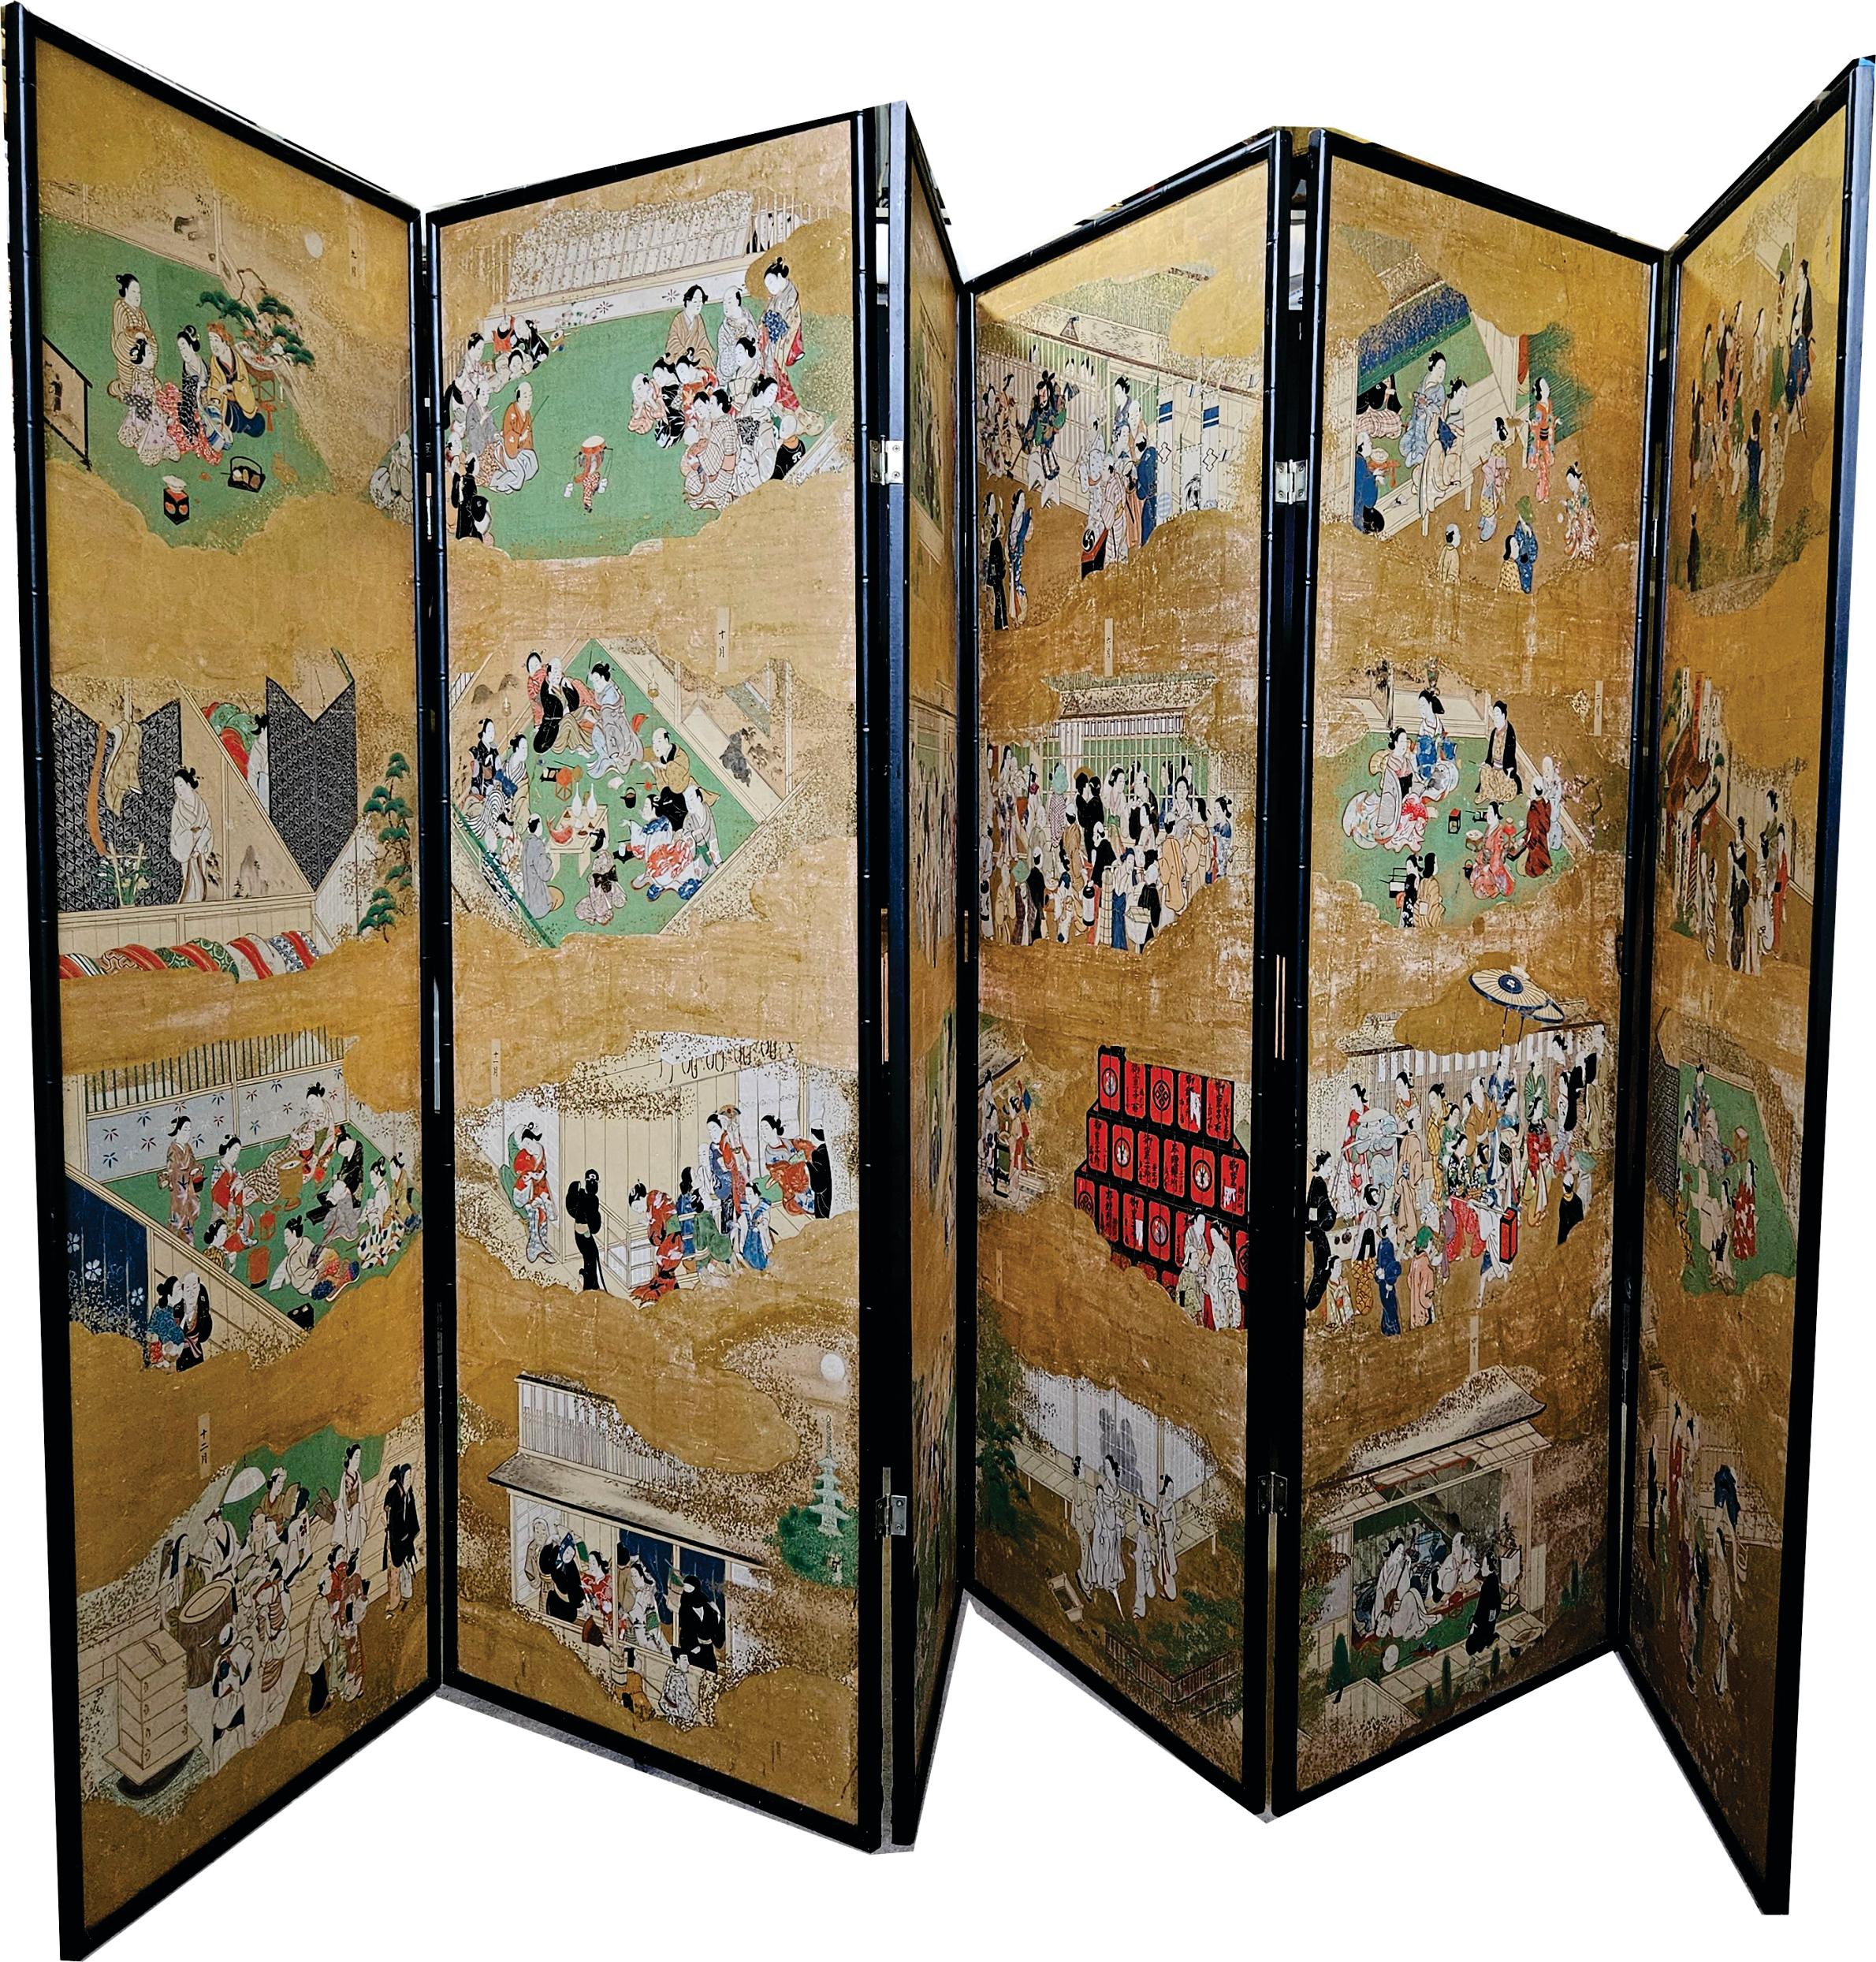 A Japanese 18th Century Tsukinami-e 6 Panel Floor Screen depicts the Activities of the Twelve Months of the Year,  mineral pigments on gold leaf, mounted on wood panels with 6 frames of faux bamboo forms and hinged together.  There are 6 panels